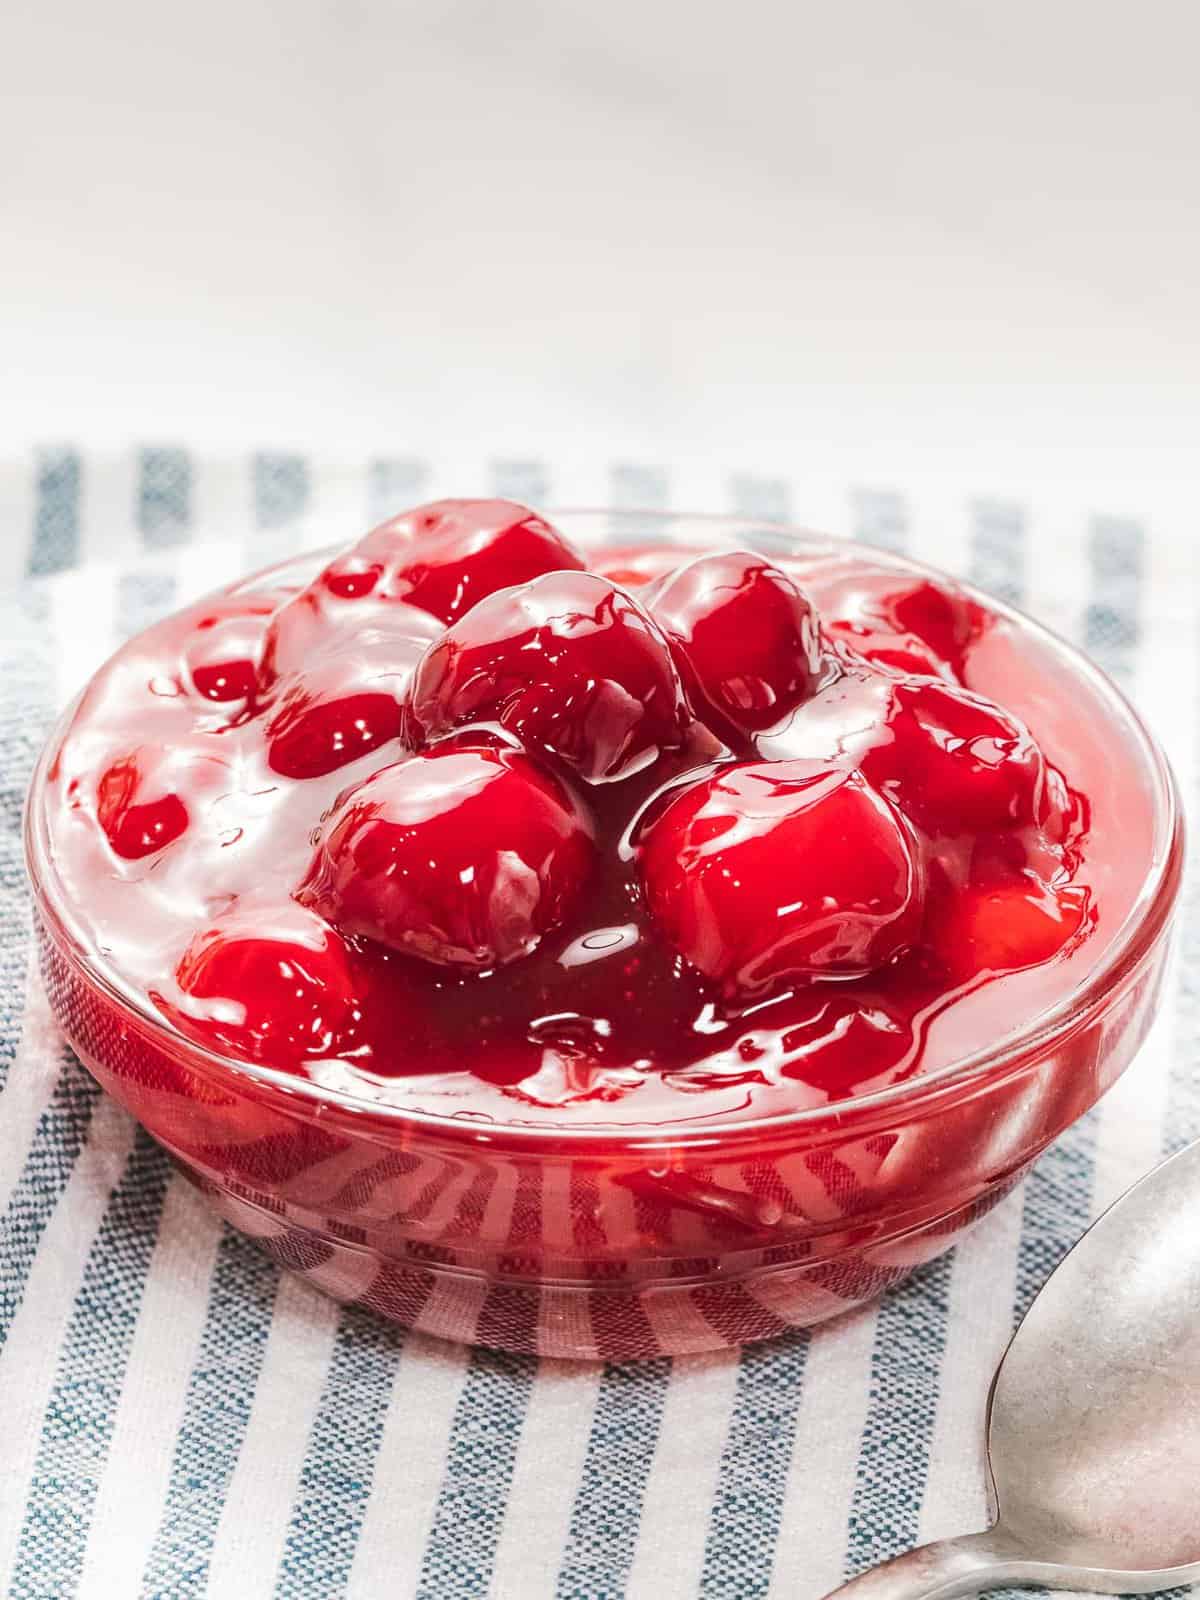 Easy cherry sauce used for topping desserts like cheesecake and cakes.